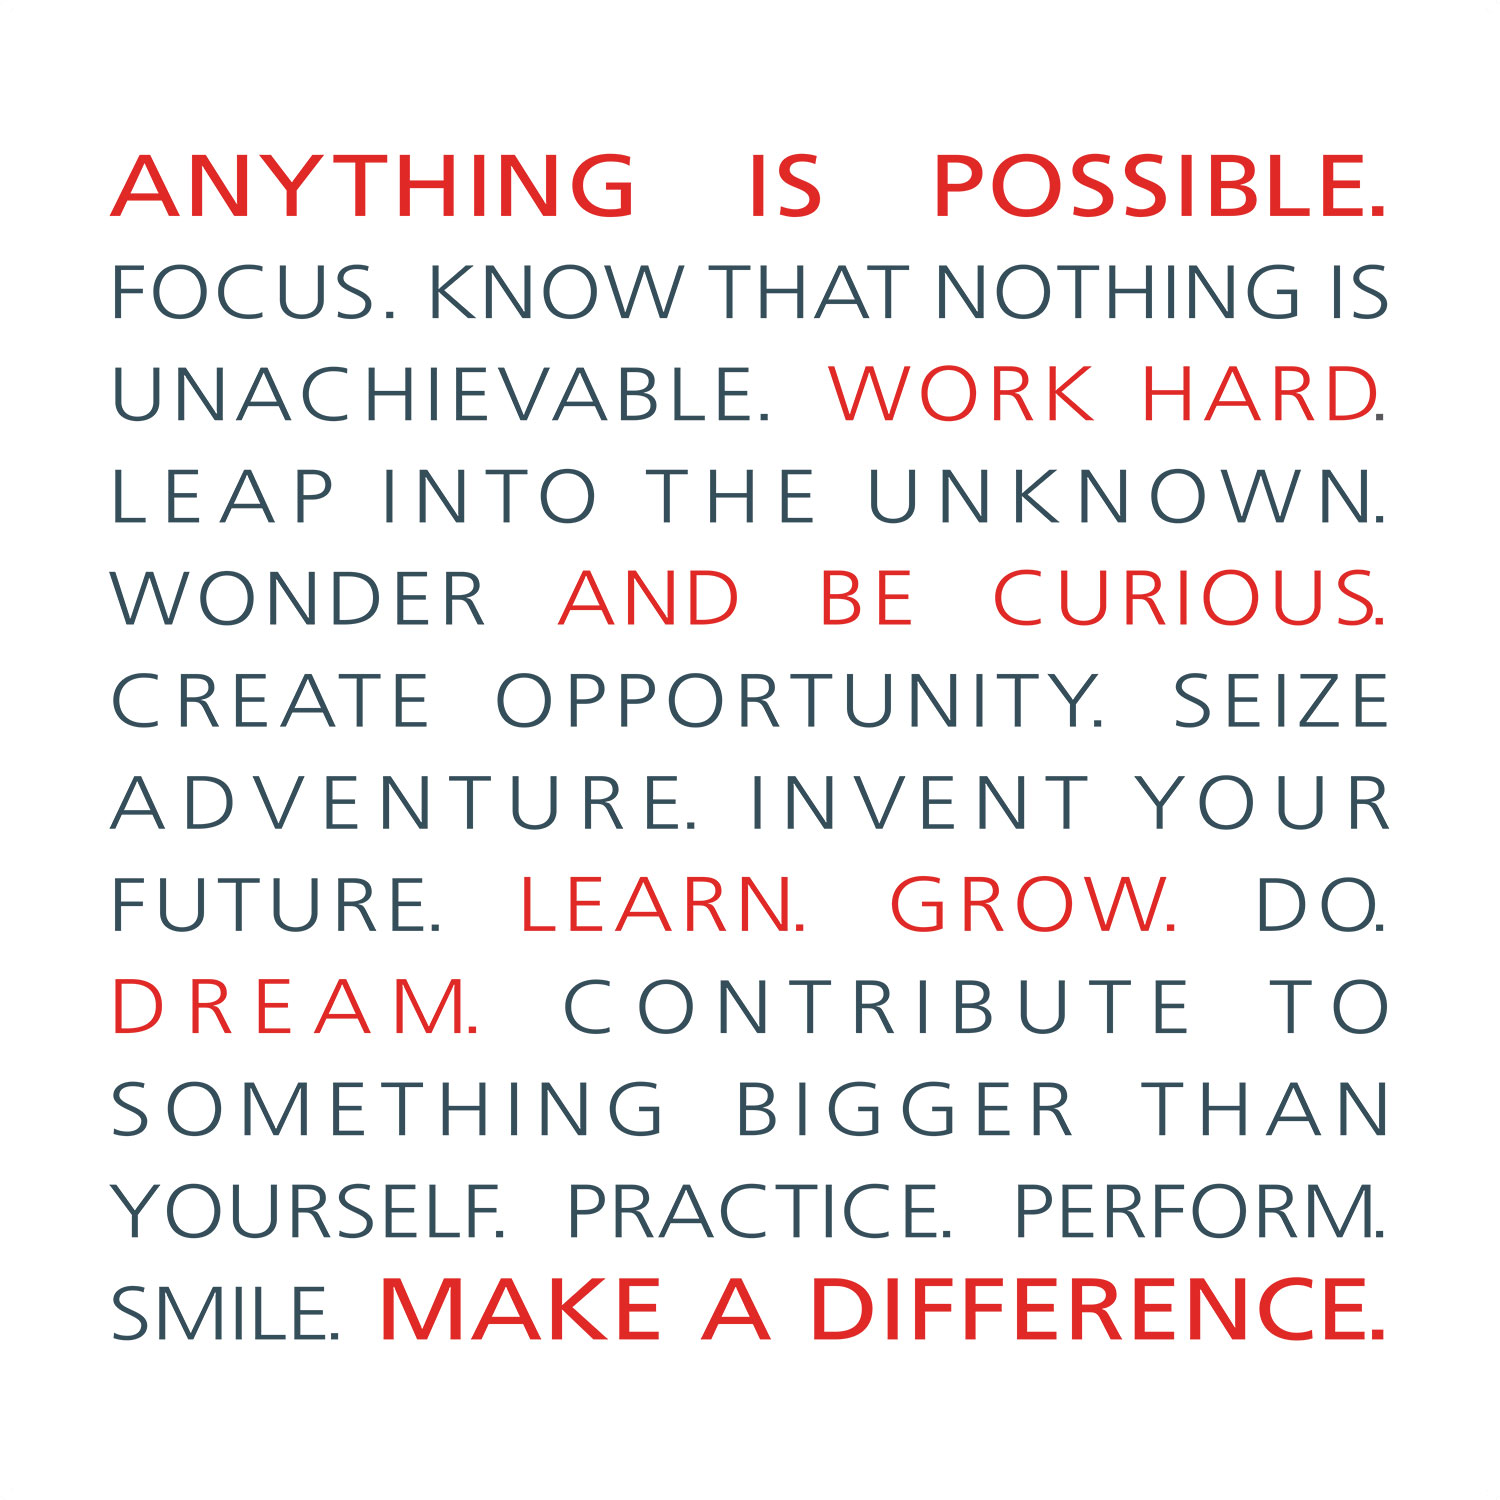 Anything is possible text poster